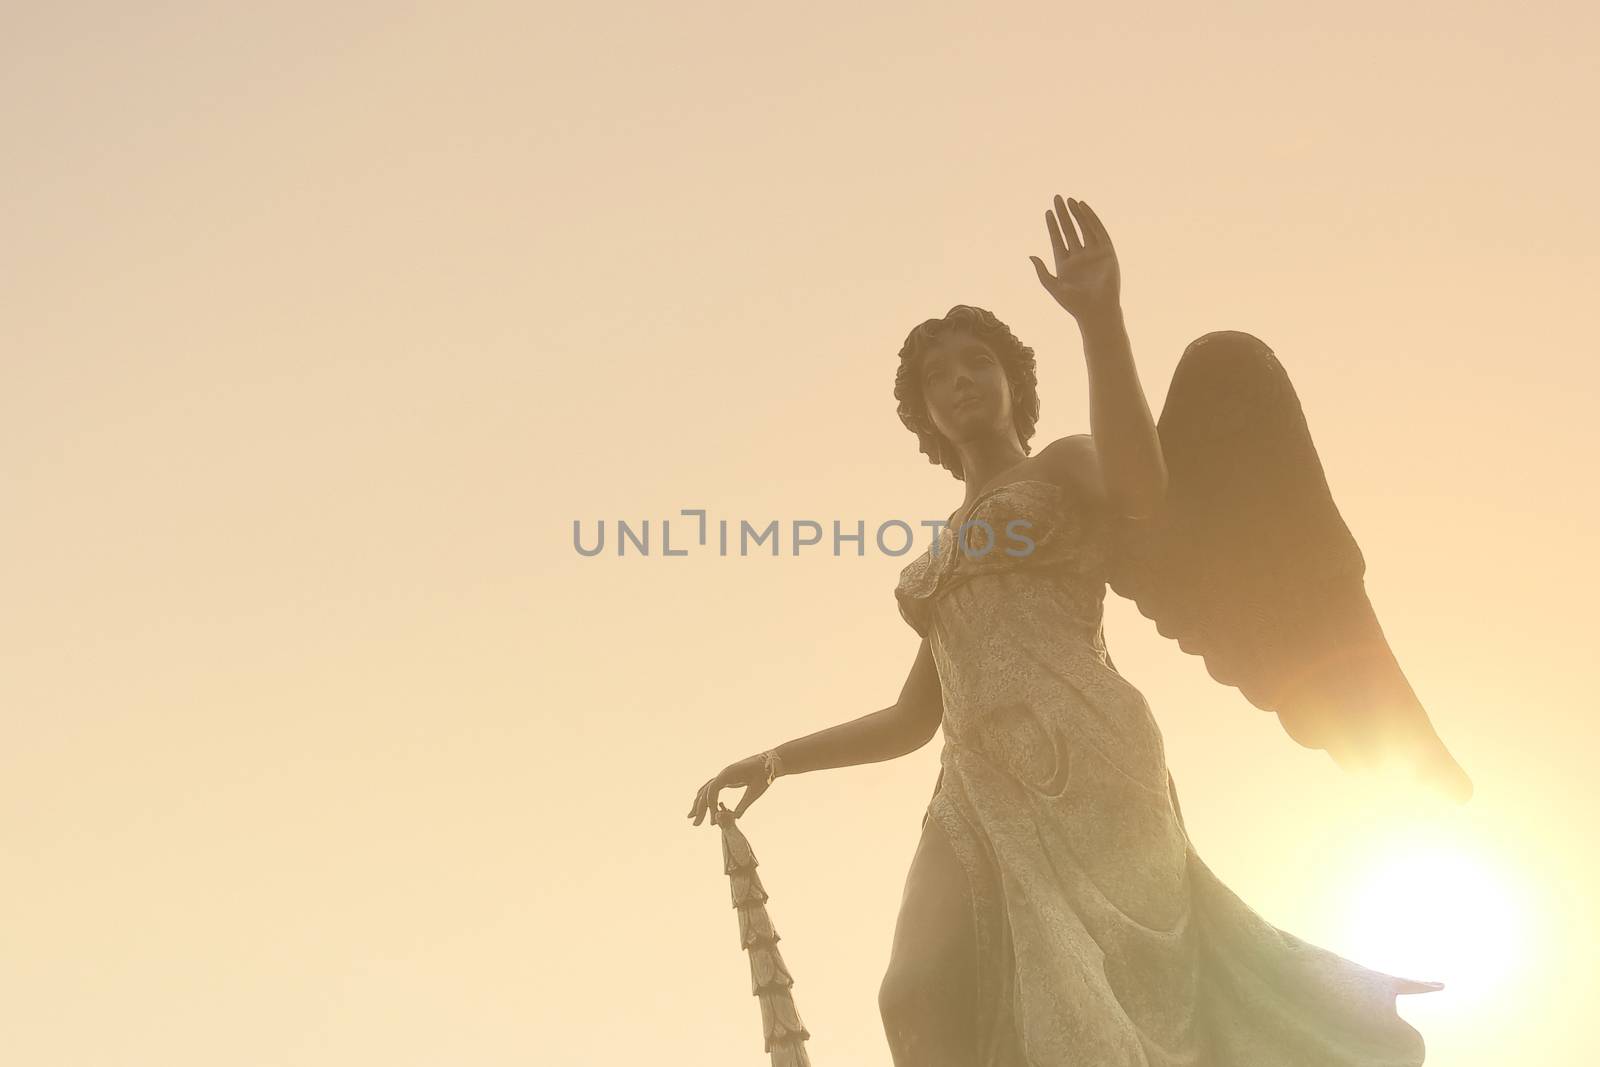 Beautiful angel statue in sunlight before sunset, faith and religion concept